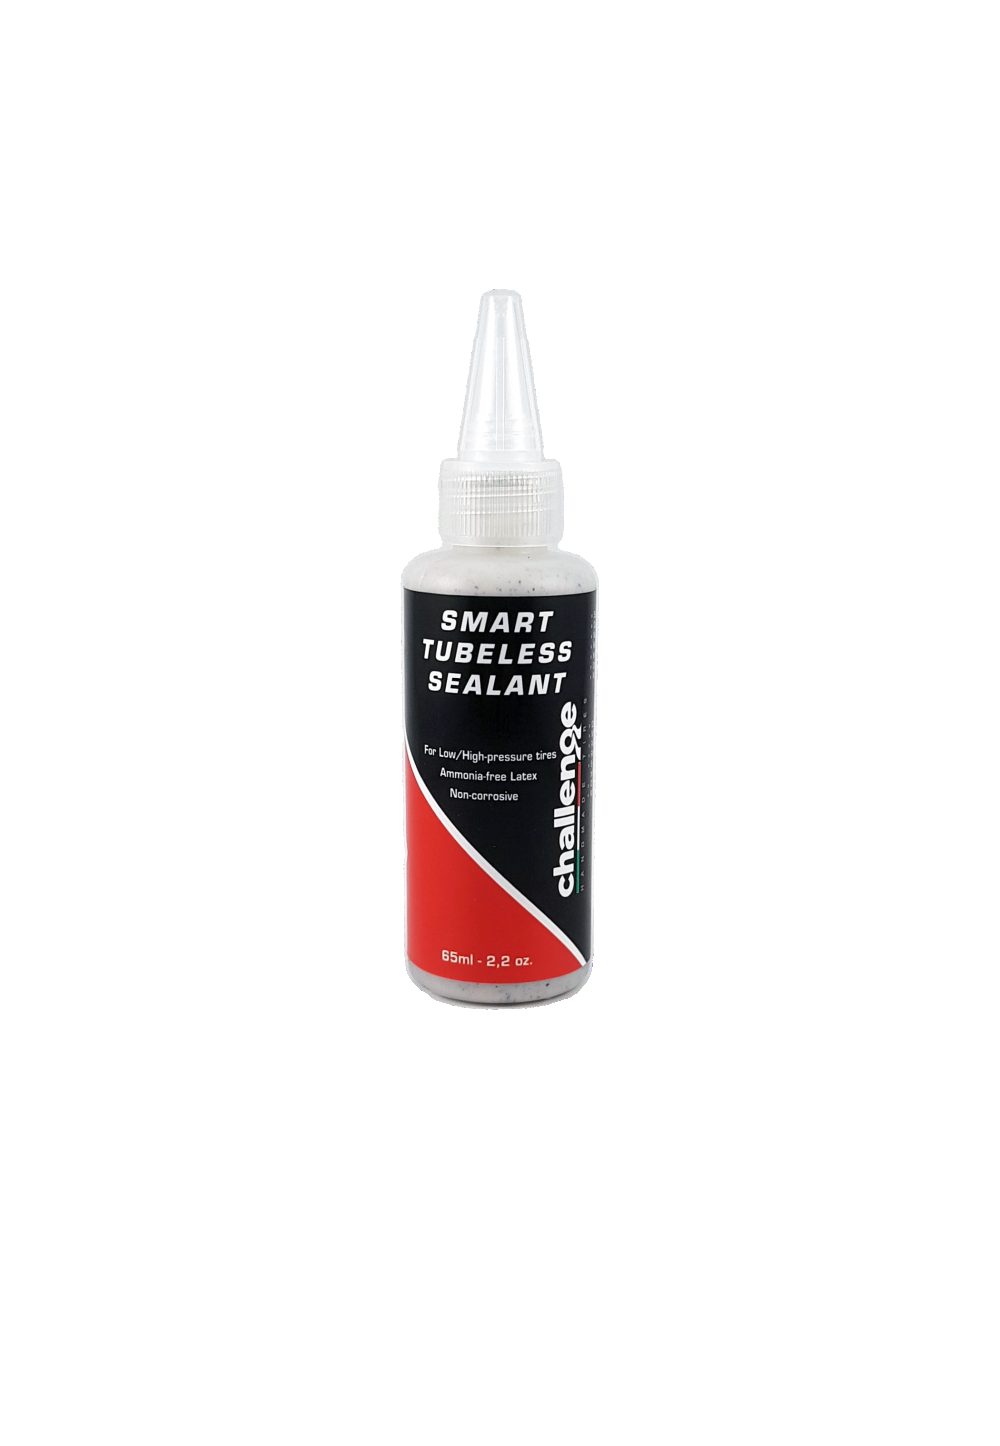 90010 tubeless sealant product page